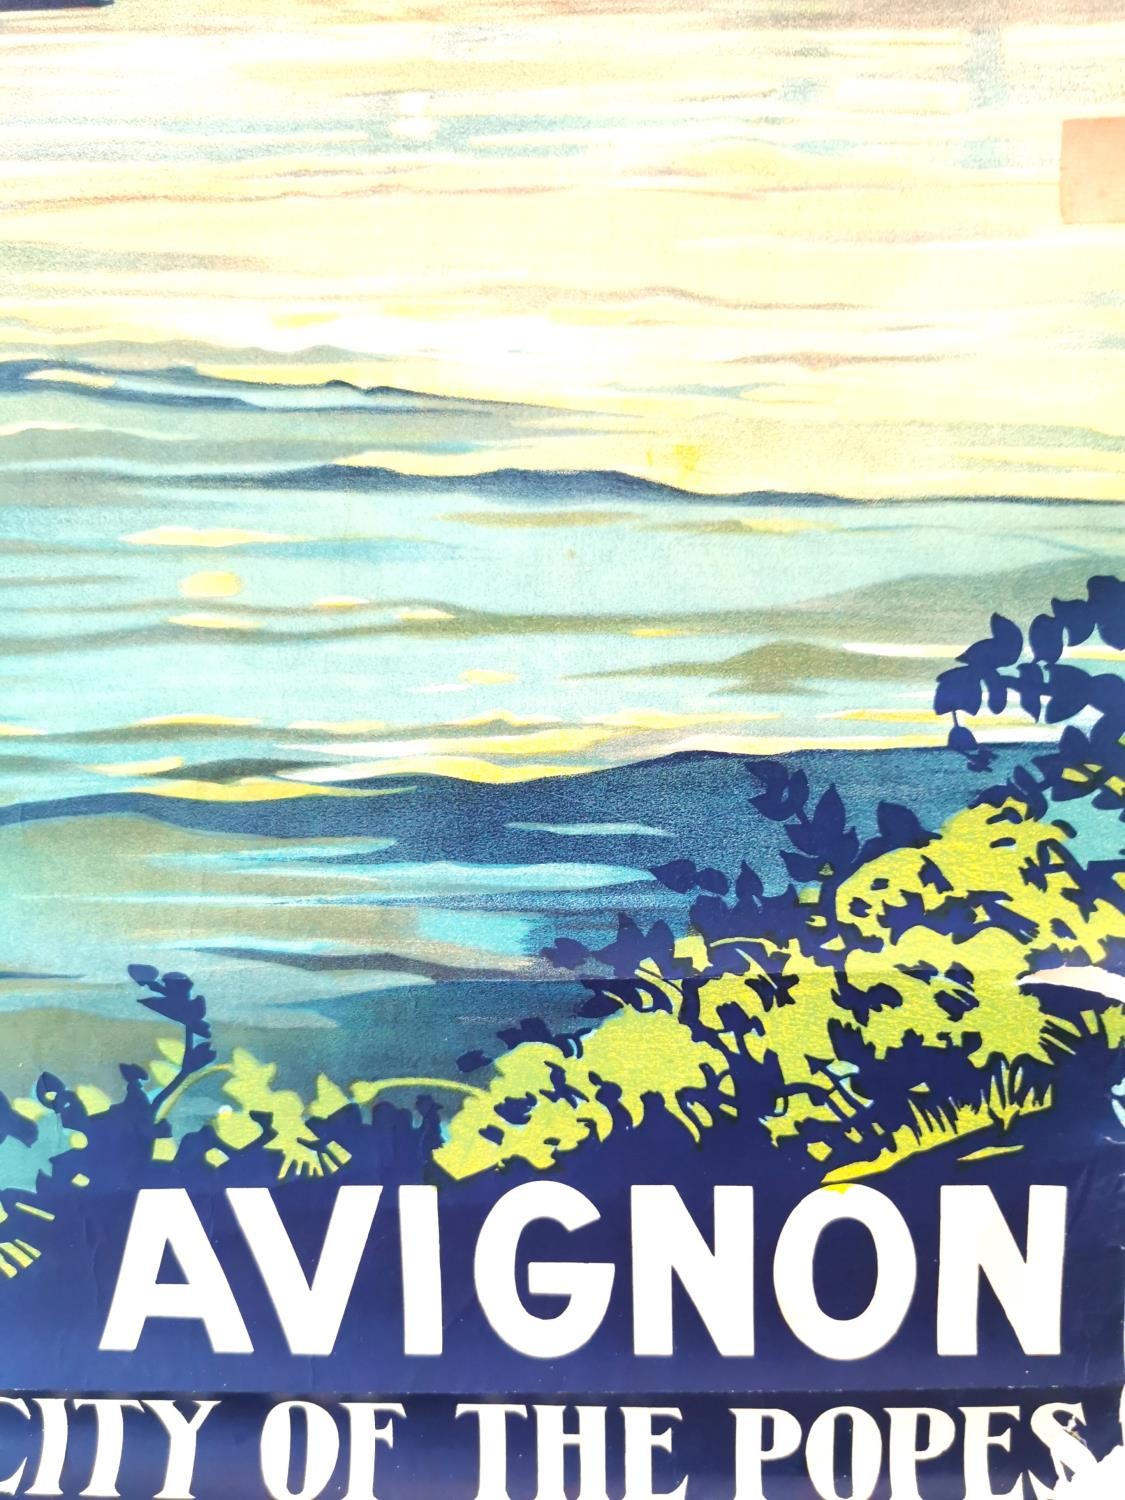 Roger Broders (1883-1953) Avignon, The City of Popes lithographic poster, 1921. H.90 W.60cm - Image 3 of 10